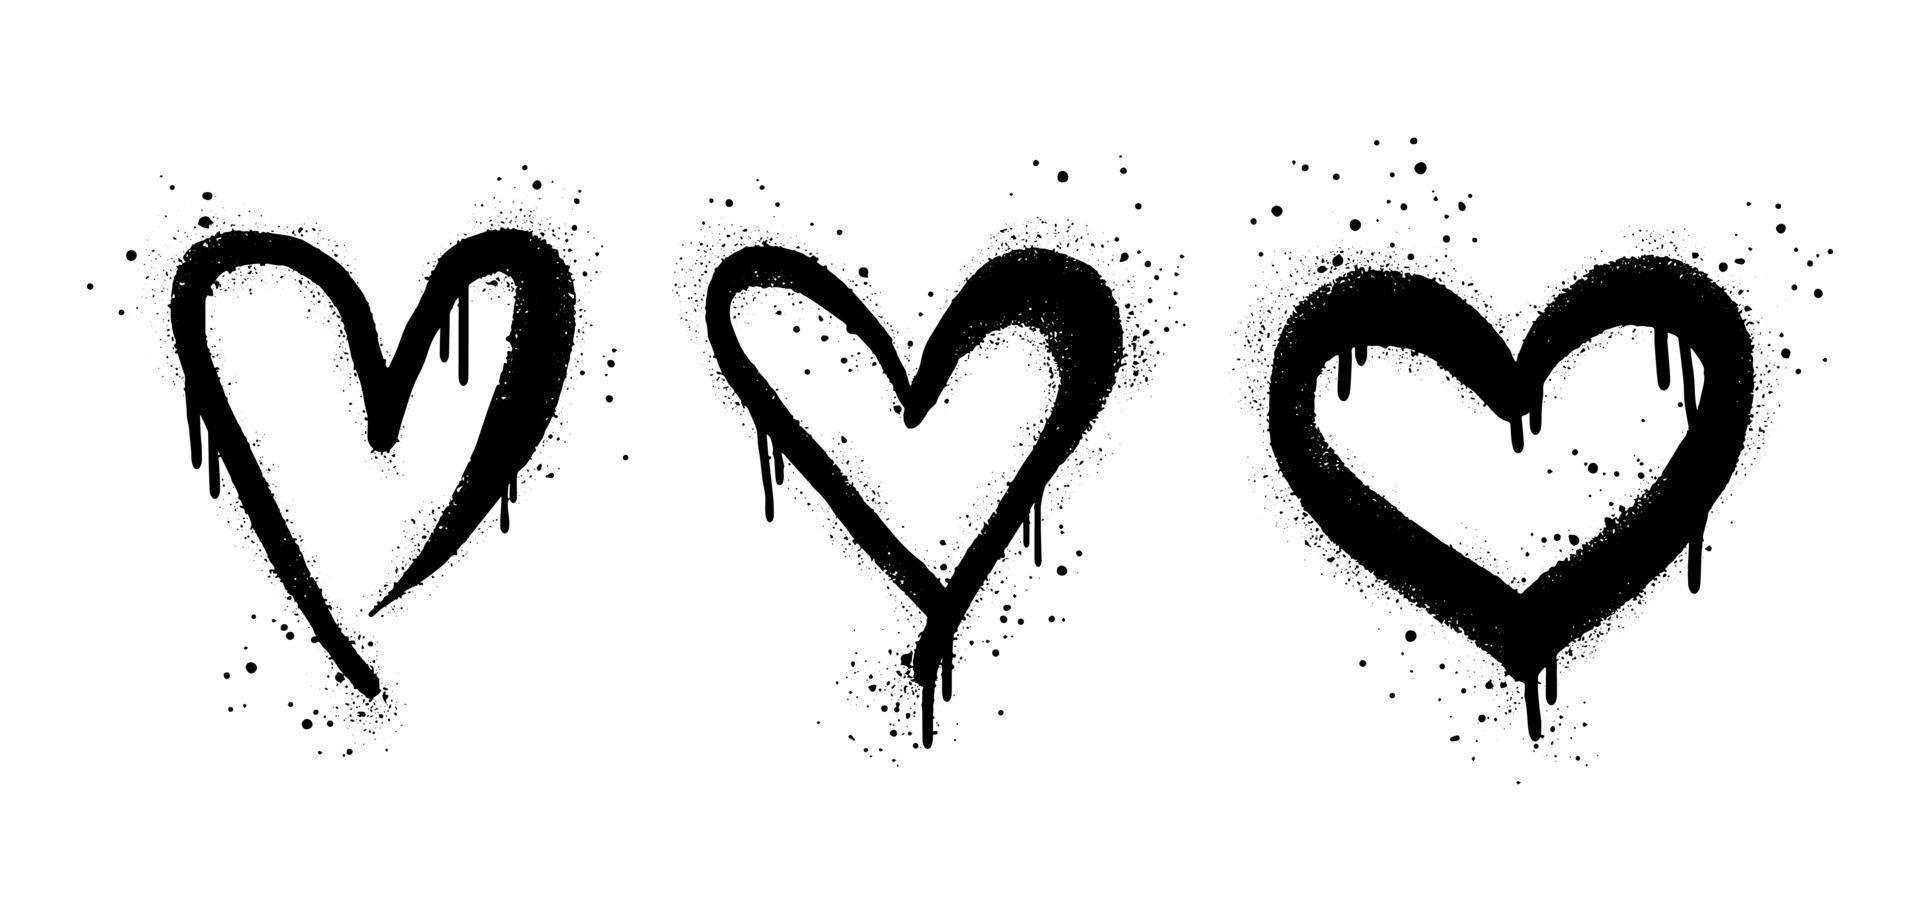 collection of Spray painted graffiti heart sign in black over white. Love heart drip symbol.  isolated on white background. vector illustration